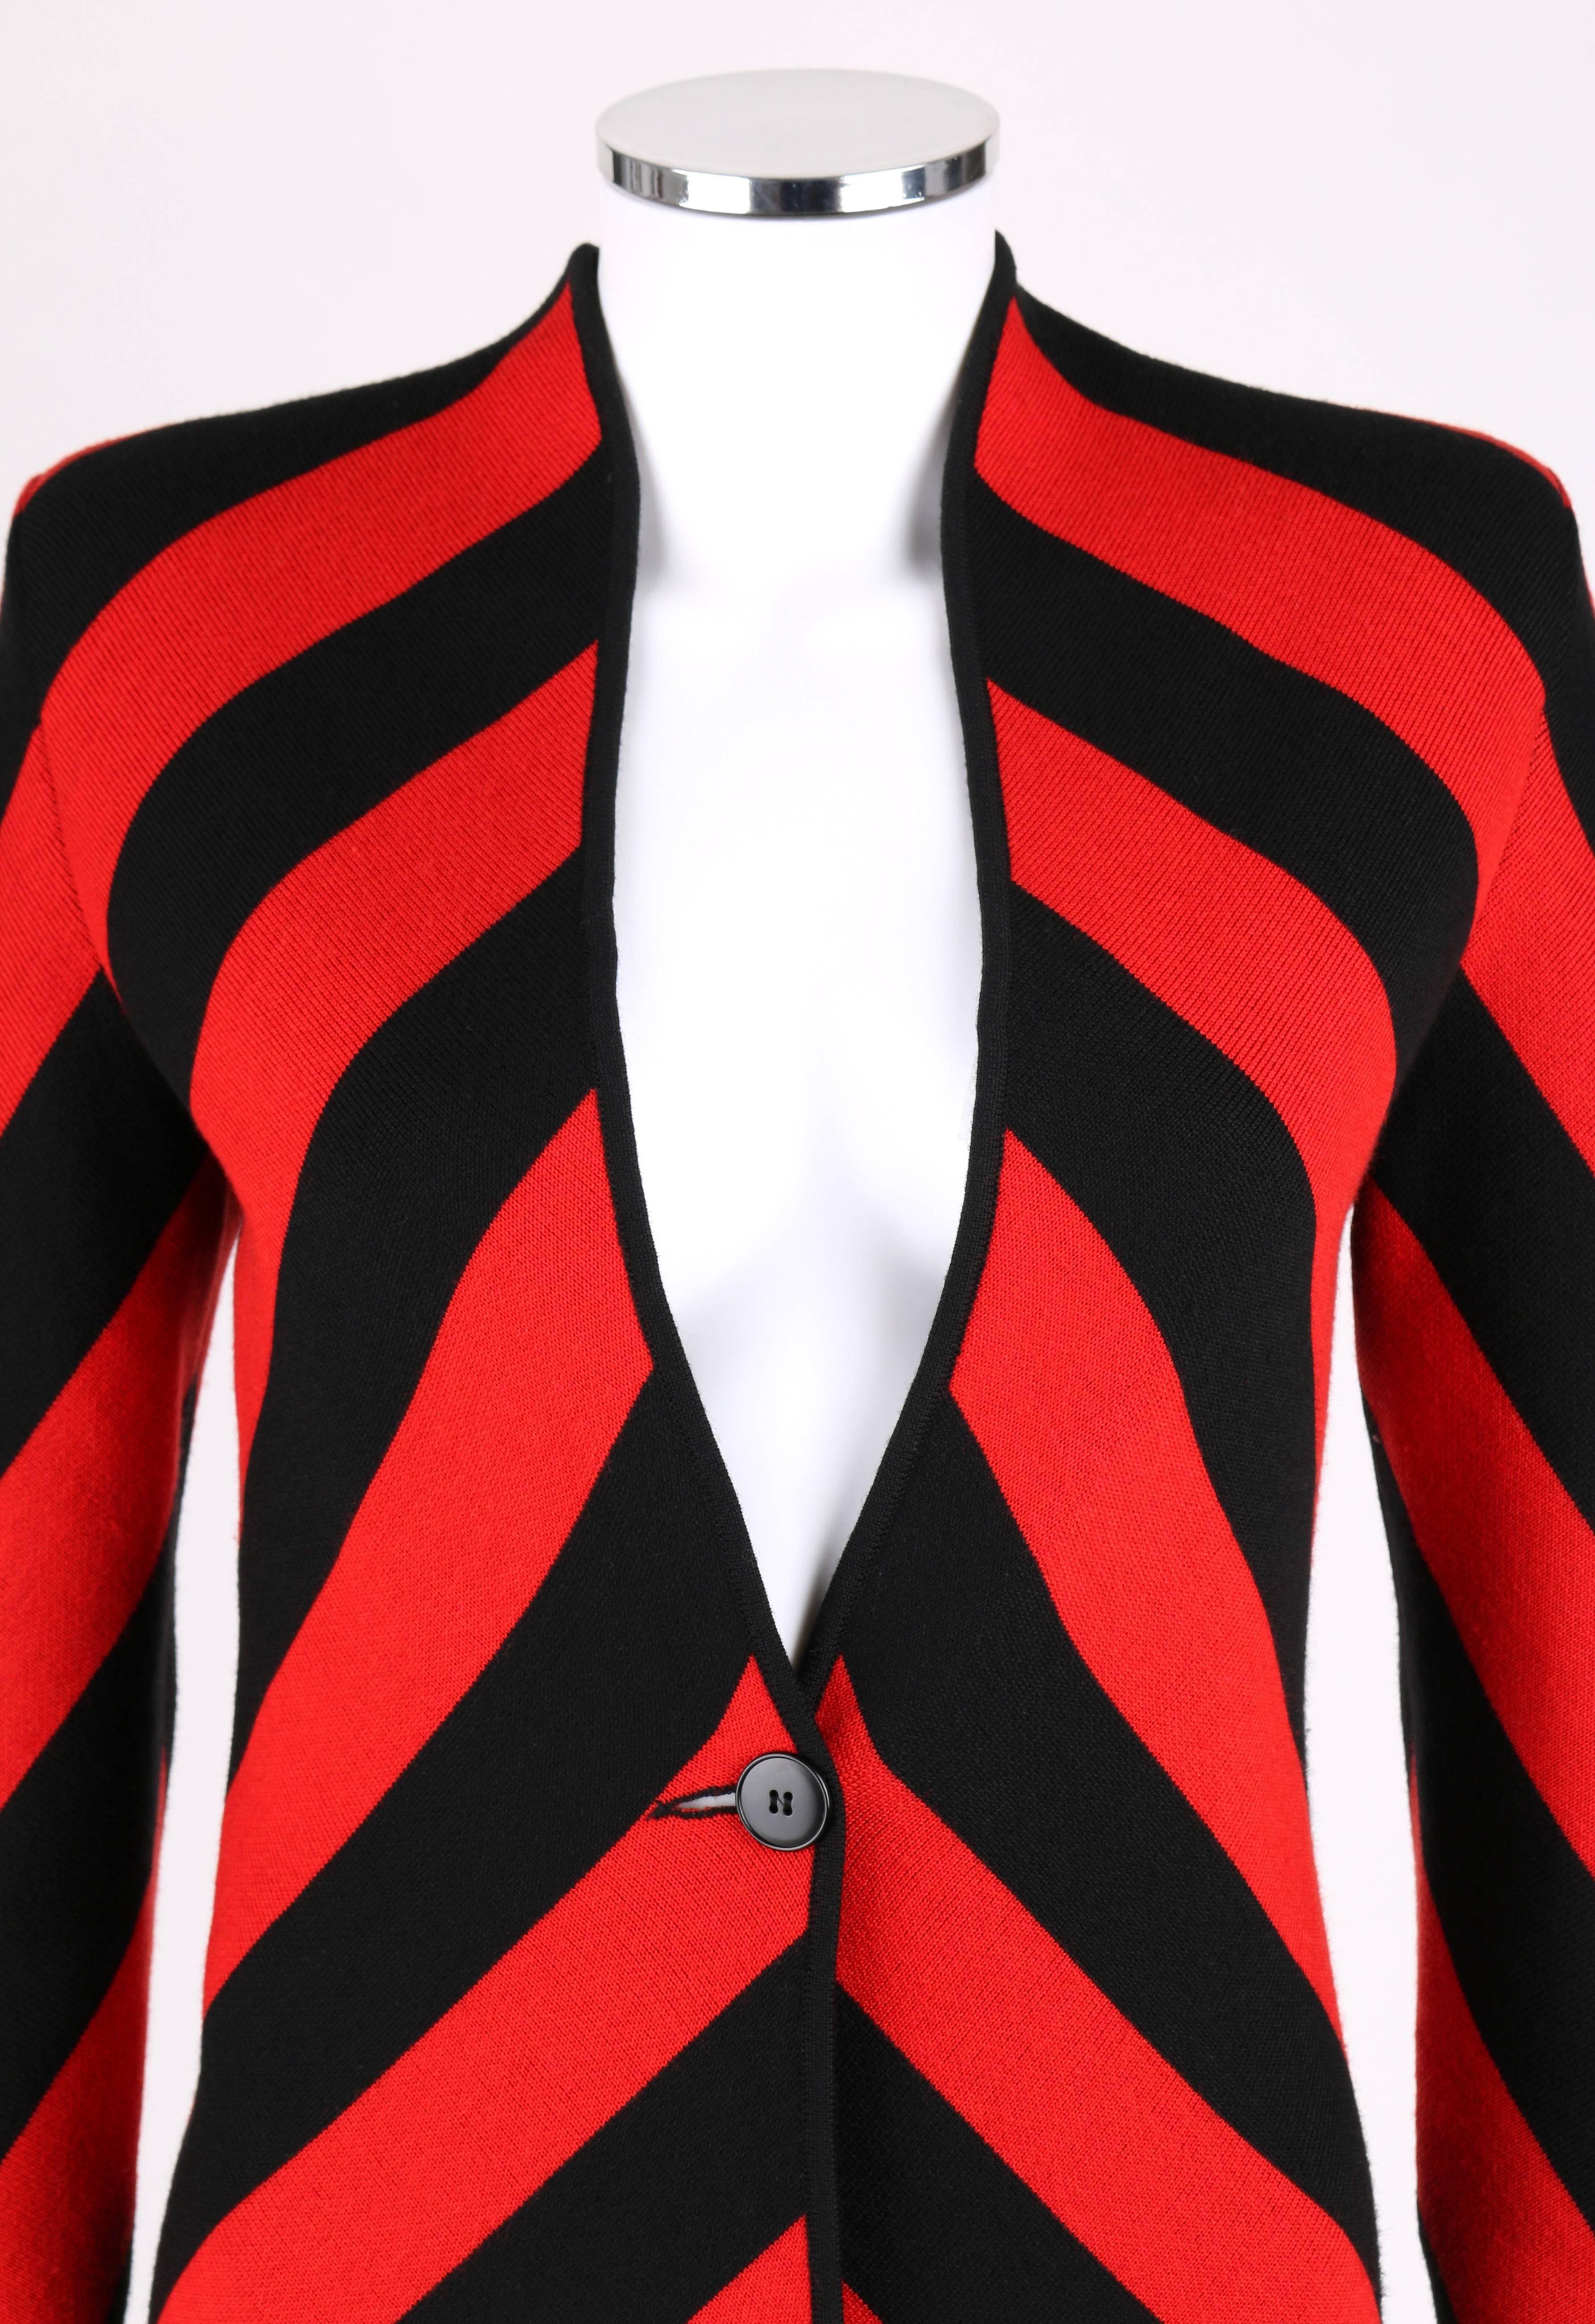 Women's GIVENCHY COUTURE A/W 1998 ALEXANDER McQUEEN Black Red Stripe Wool Knit Blazer  For Sale